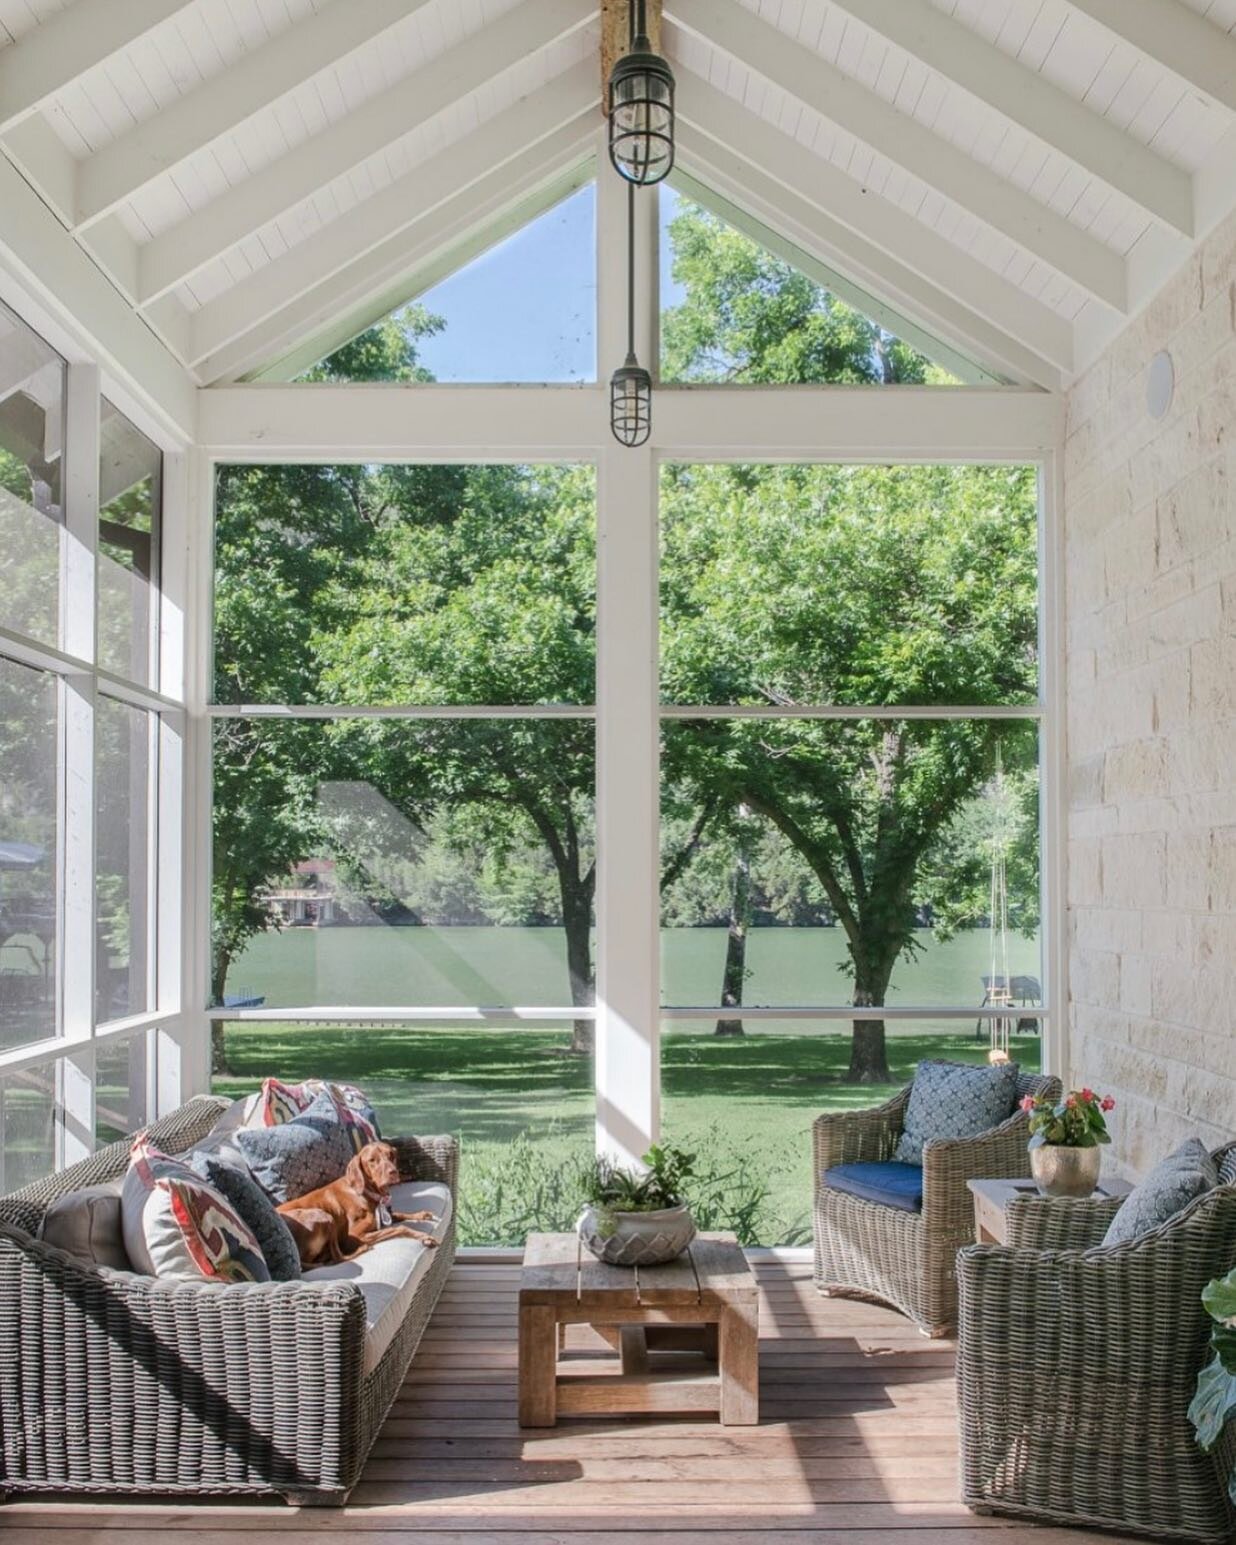 Hope you&rsquo;re relaxing on this Labor Day holiday! Here&rsquo;s a flashback to a beloved outdoor space on Lake Austin completed in 2015. 

Built by @kochconstruction 
Photo by @natalielacylange 

#edgewaterresidence
#sarahbullockmcintyrearchitect 